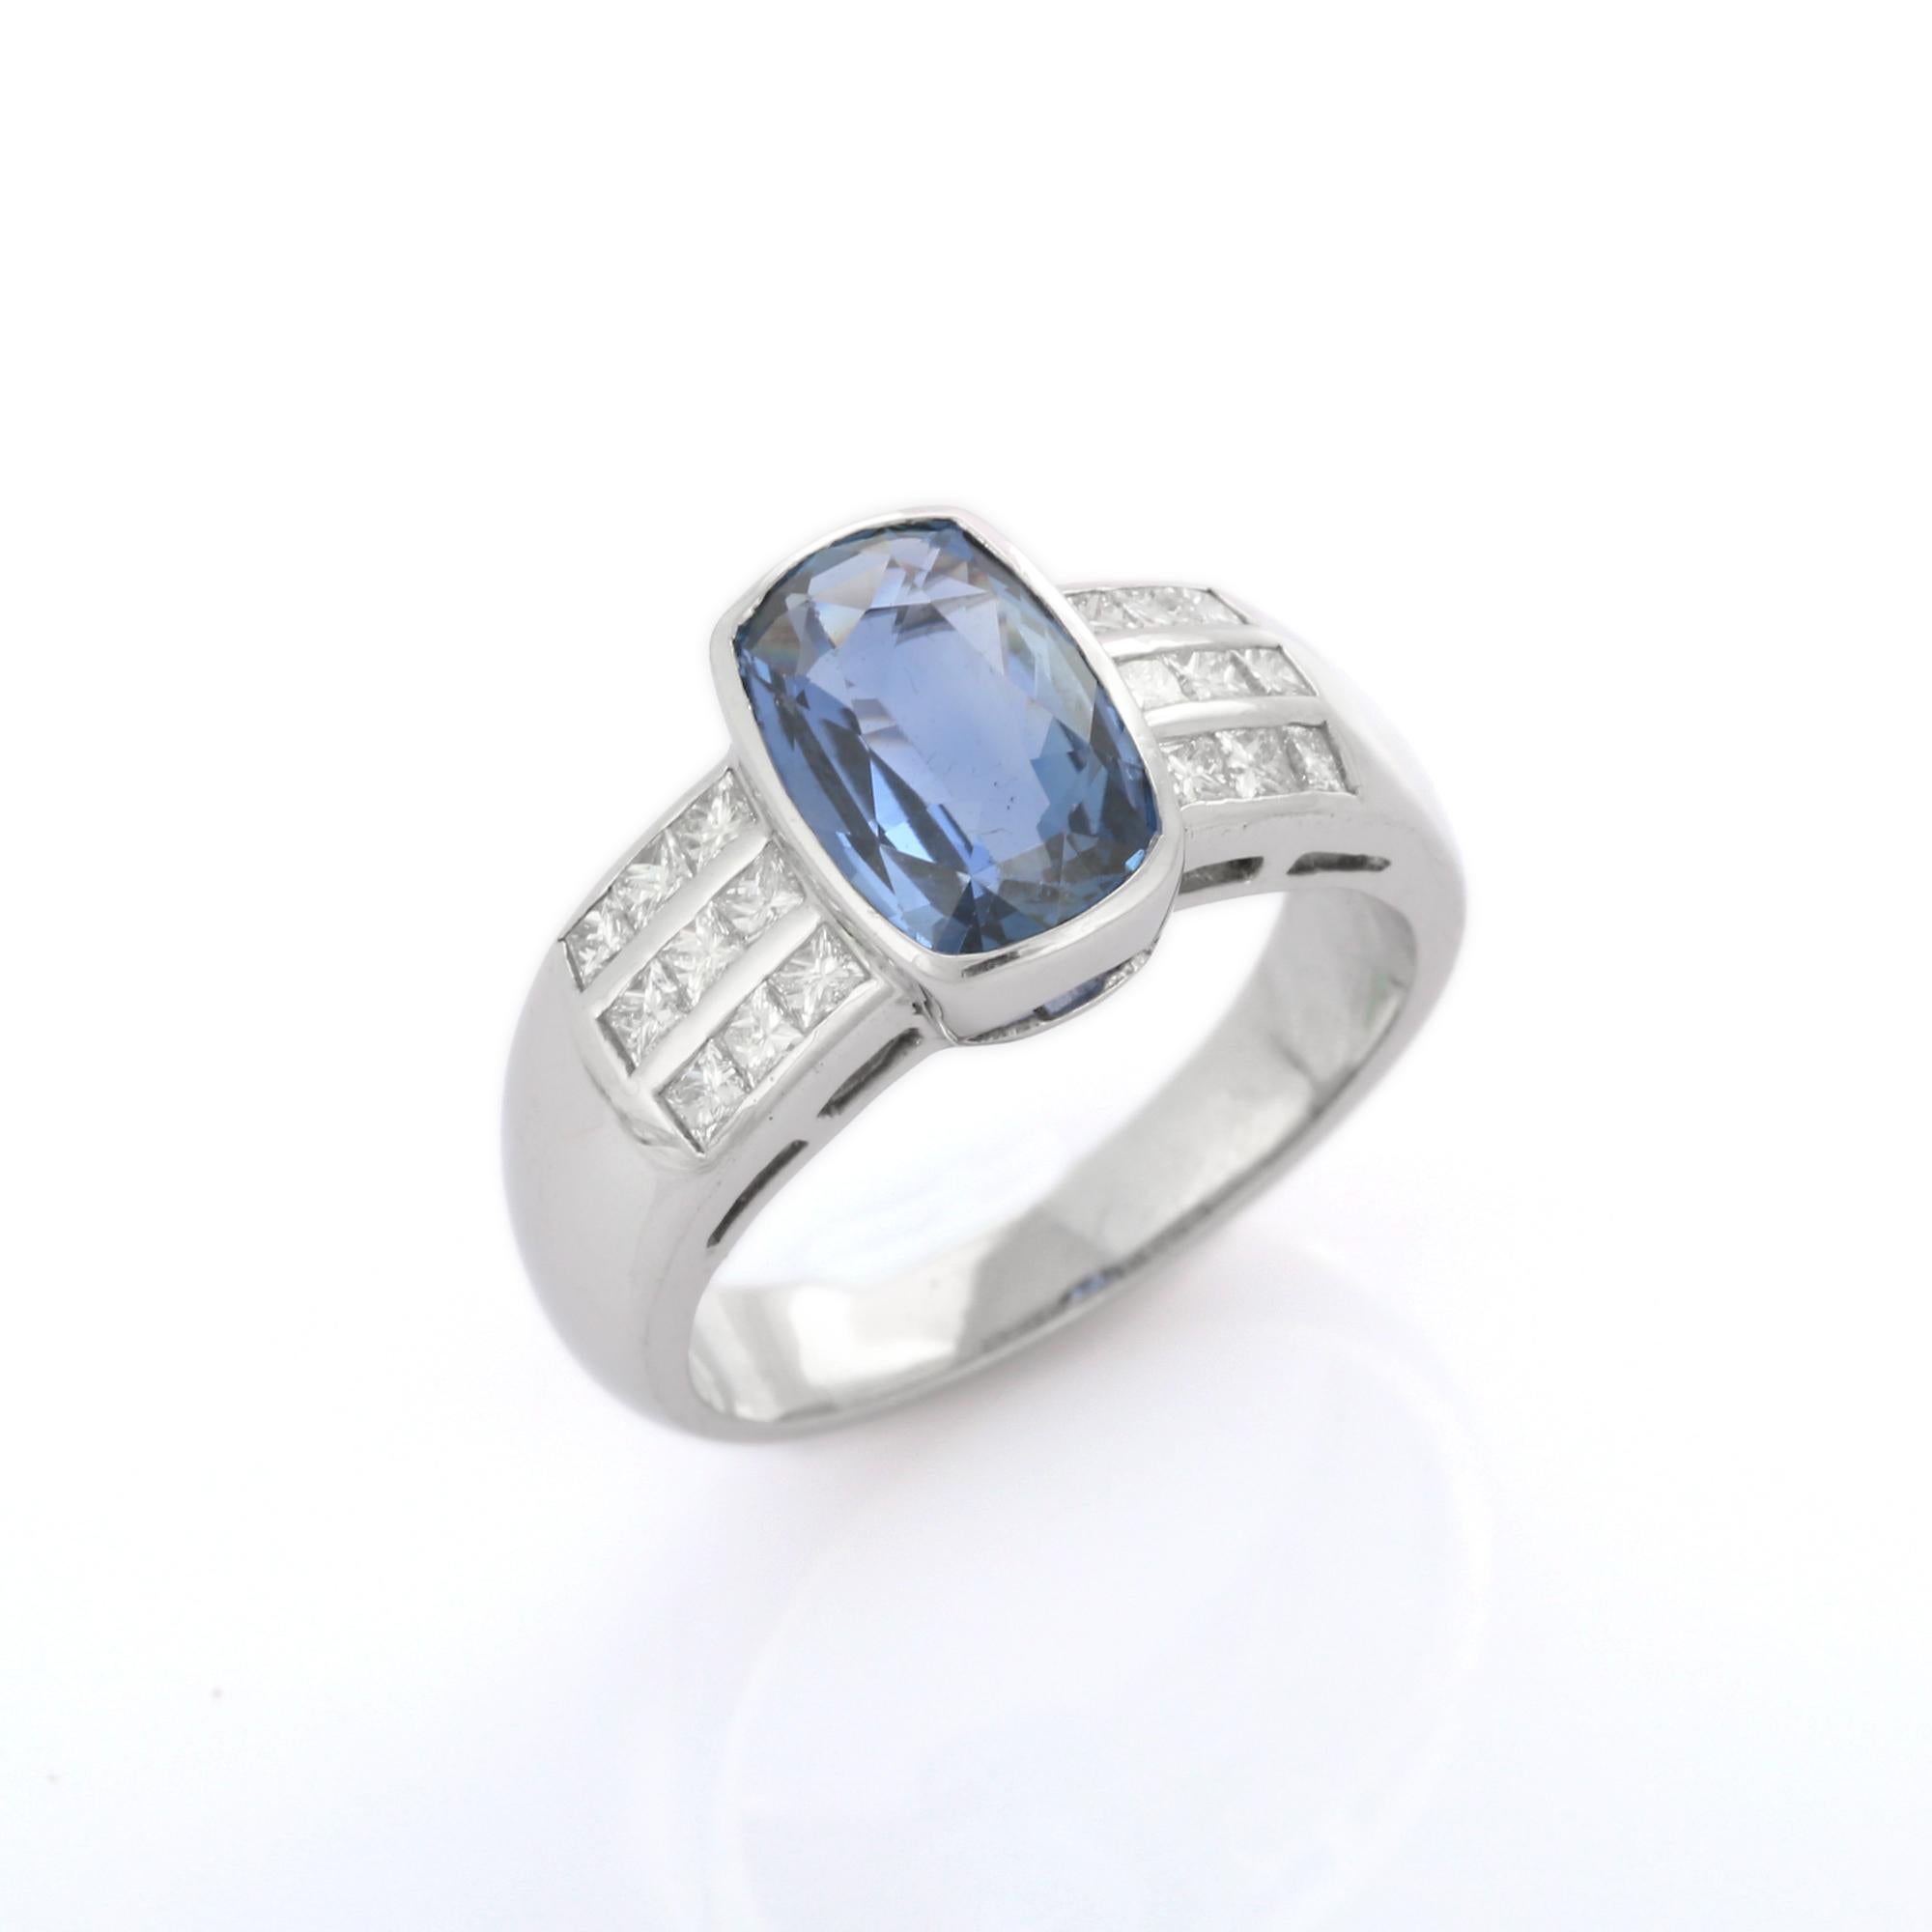 For Sale:  18K White Gold Oblong Cushion Cut Blue Sapphire and Diamond Engagement Ring 2